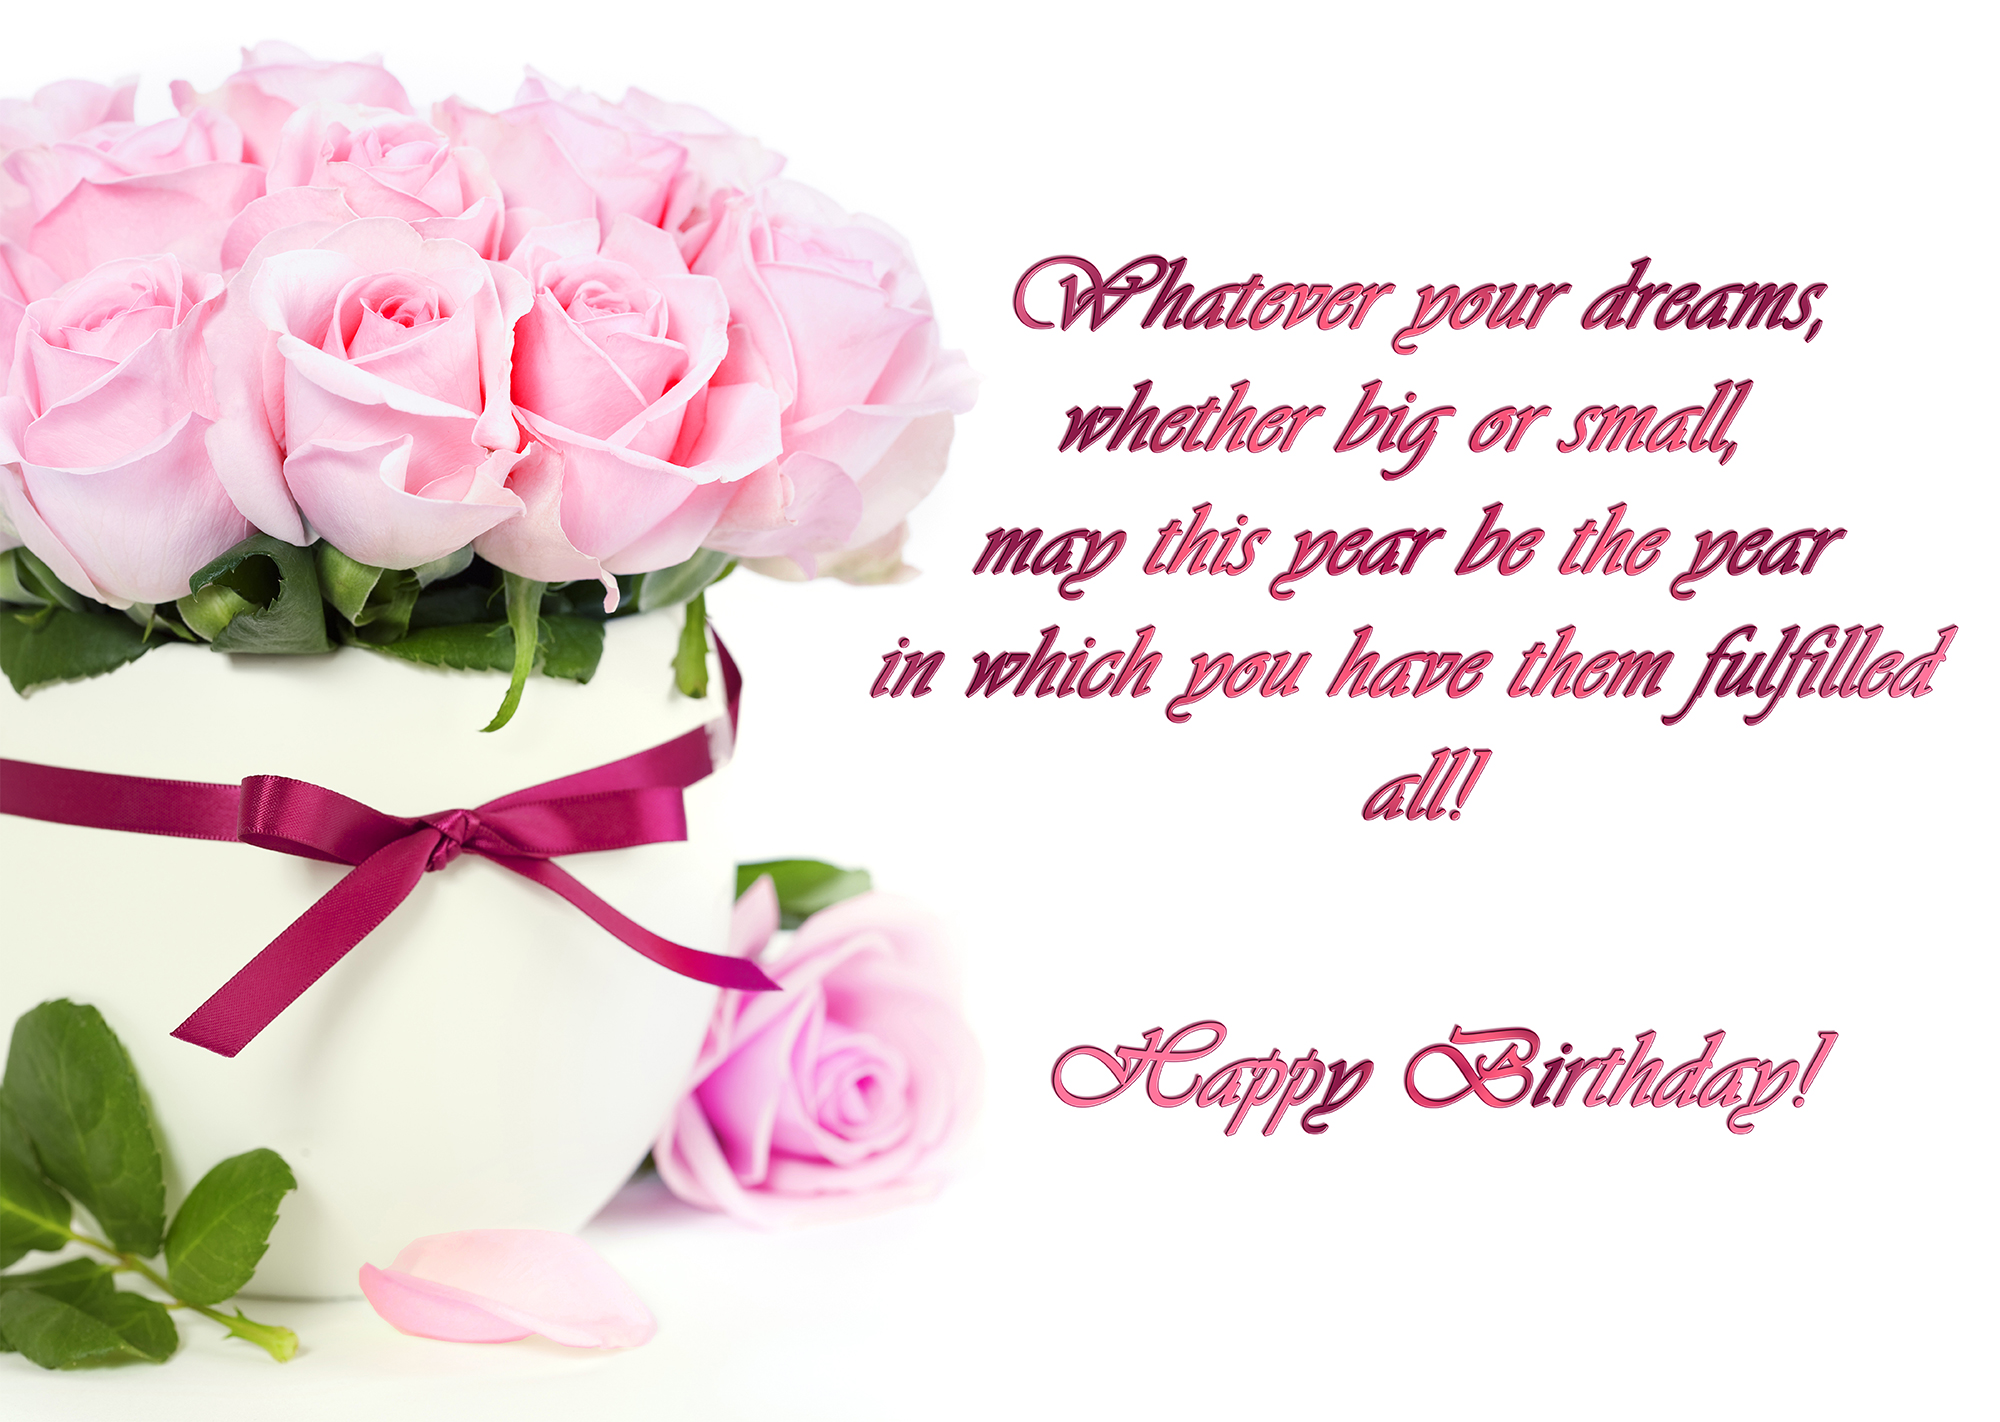 Delicate Pink Roses Birthday Greeting Card | Gallery Yopriceville ...